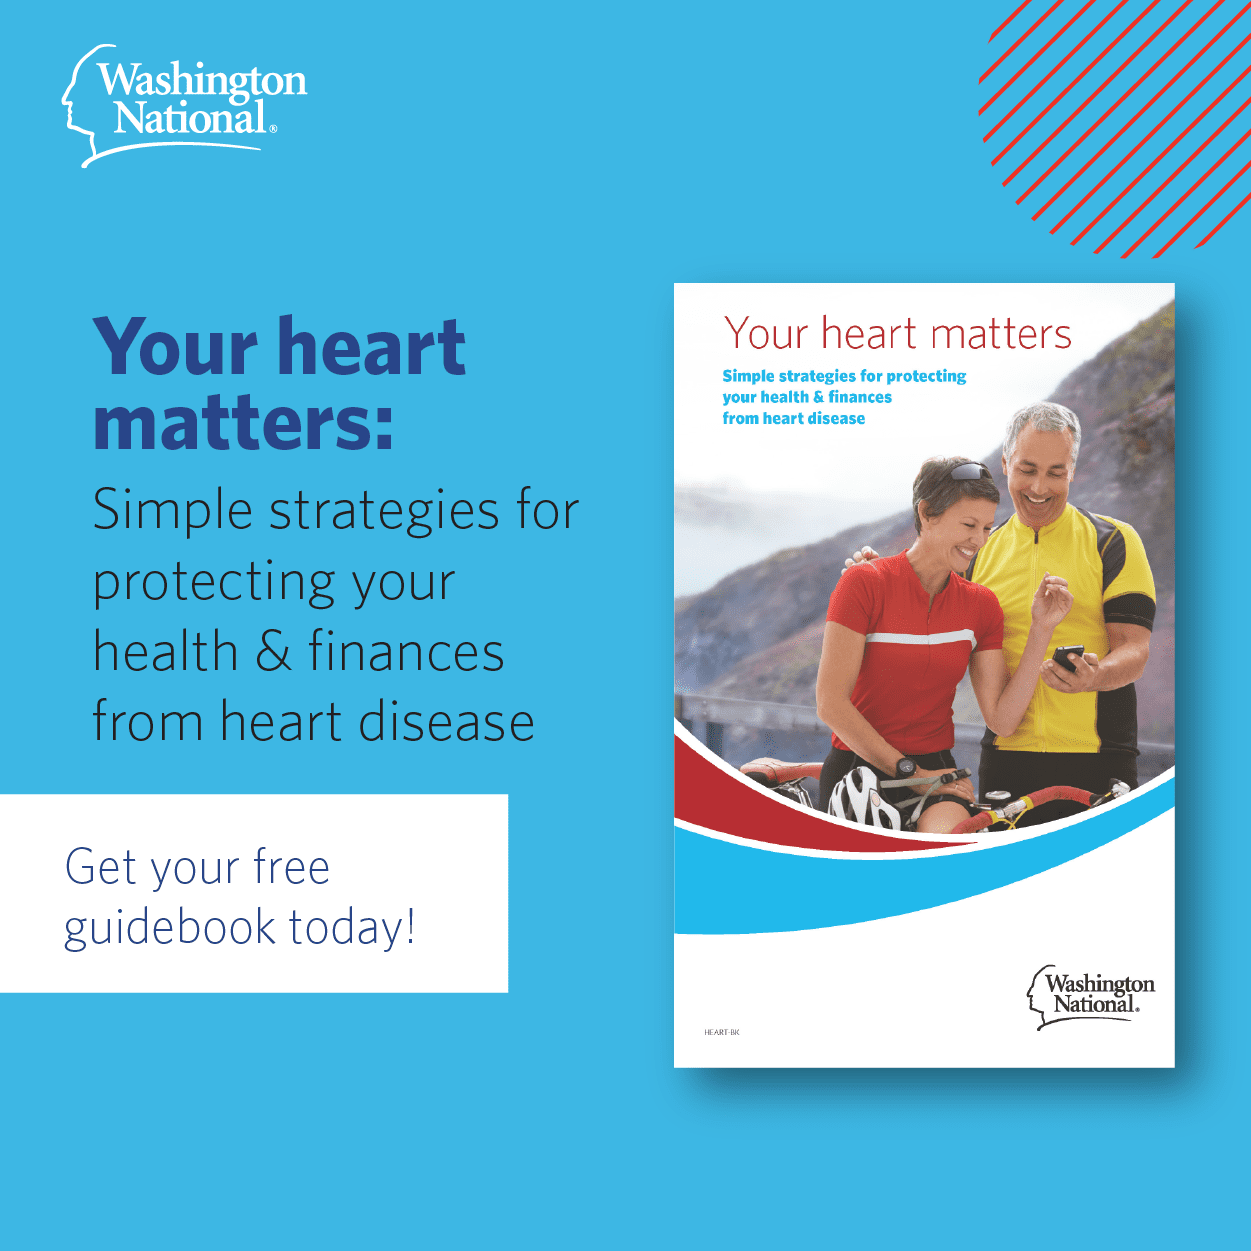 A downloadable guide to keeping your heart healthy.